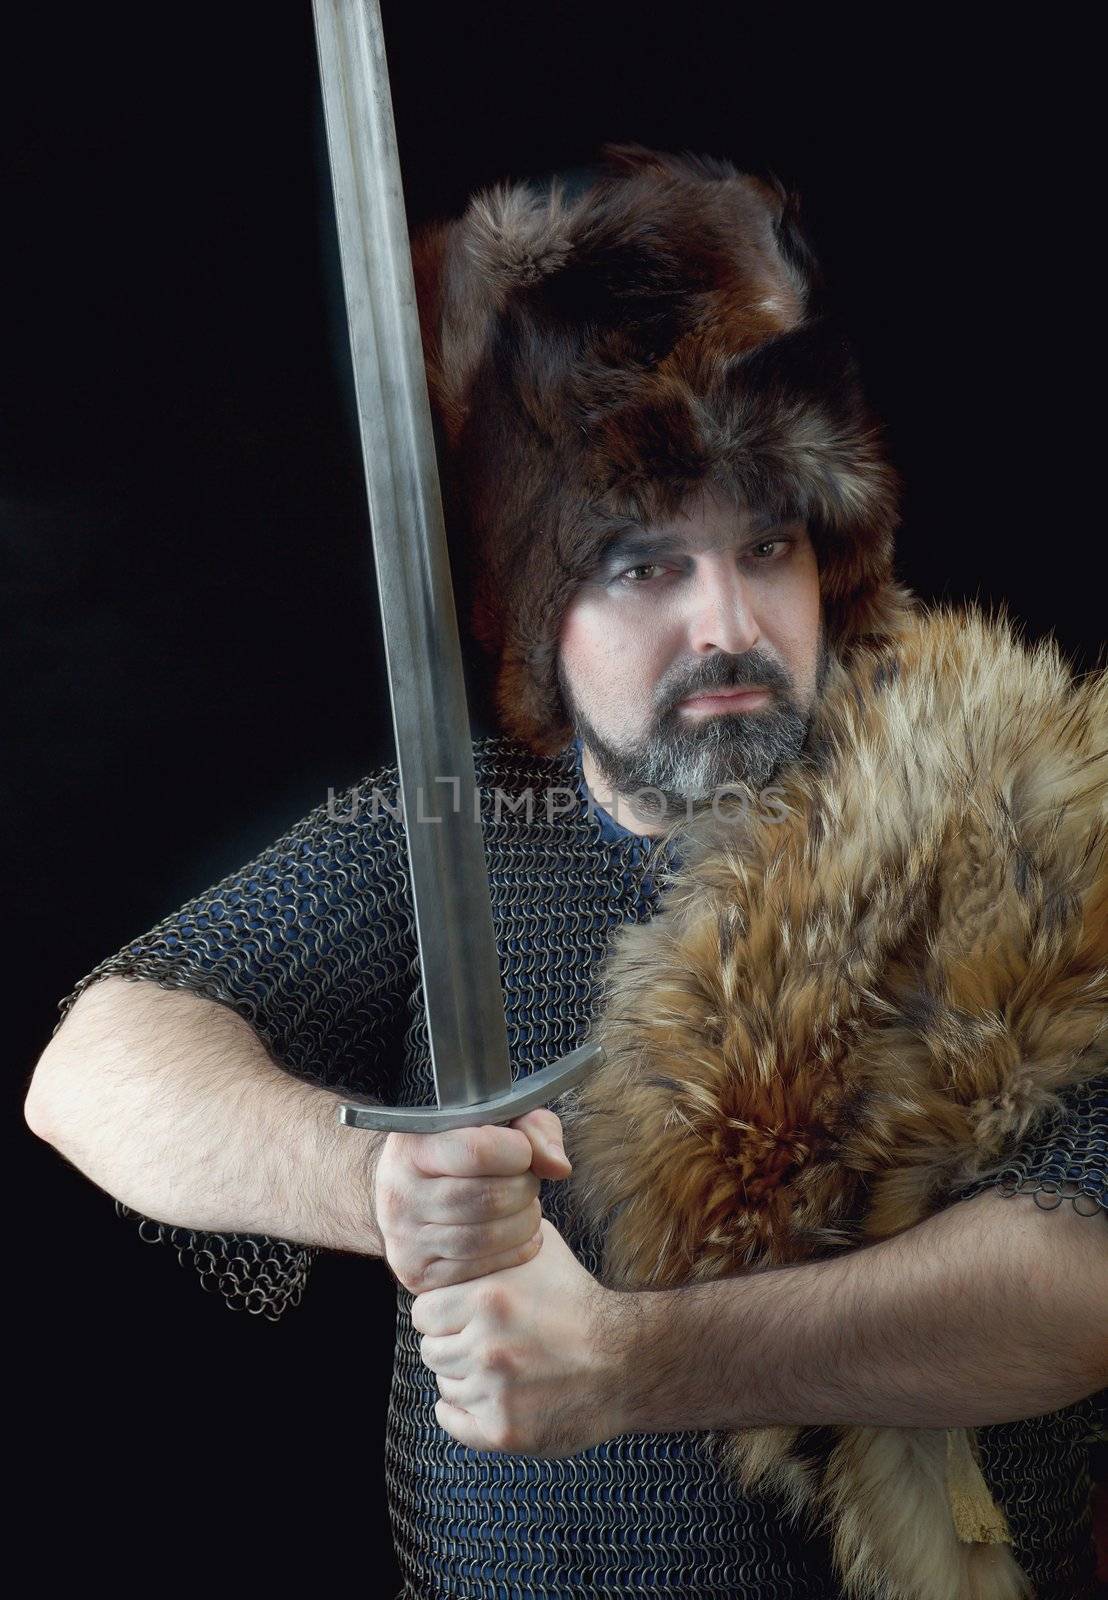 	Cimmerian.barbarian  Warrior.Medieval knight in the armor with the sword.
